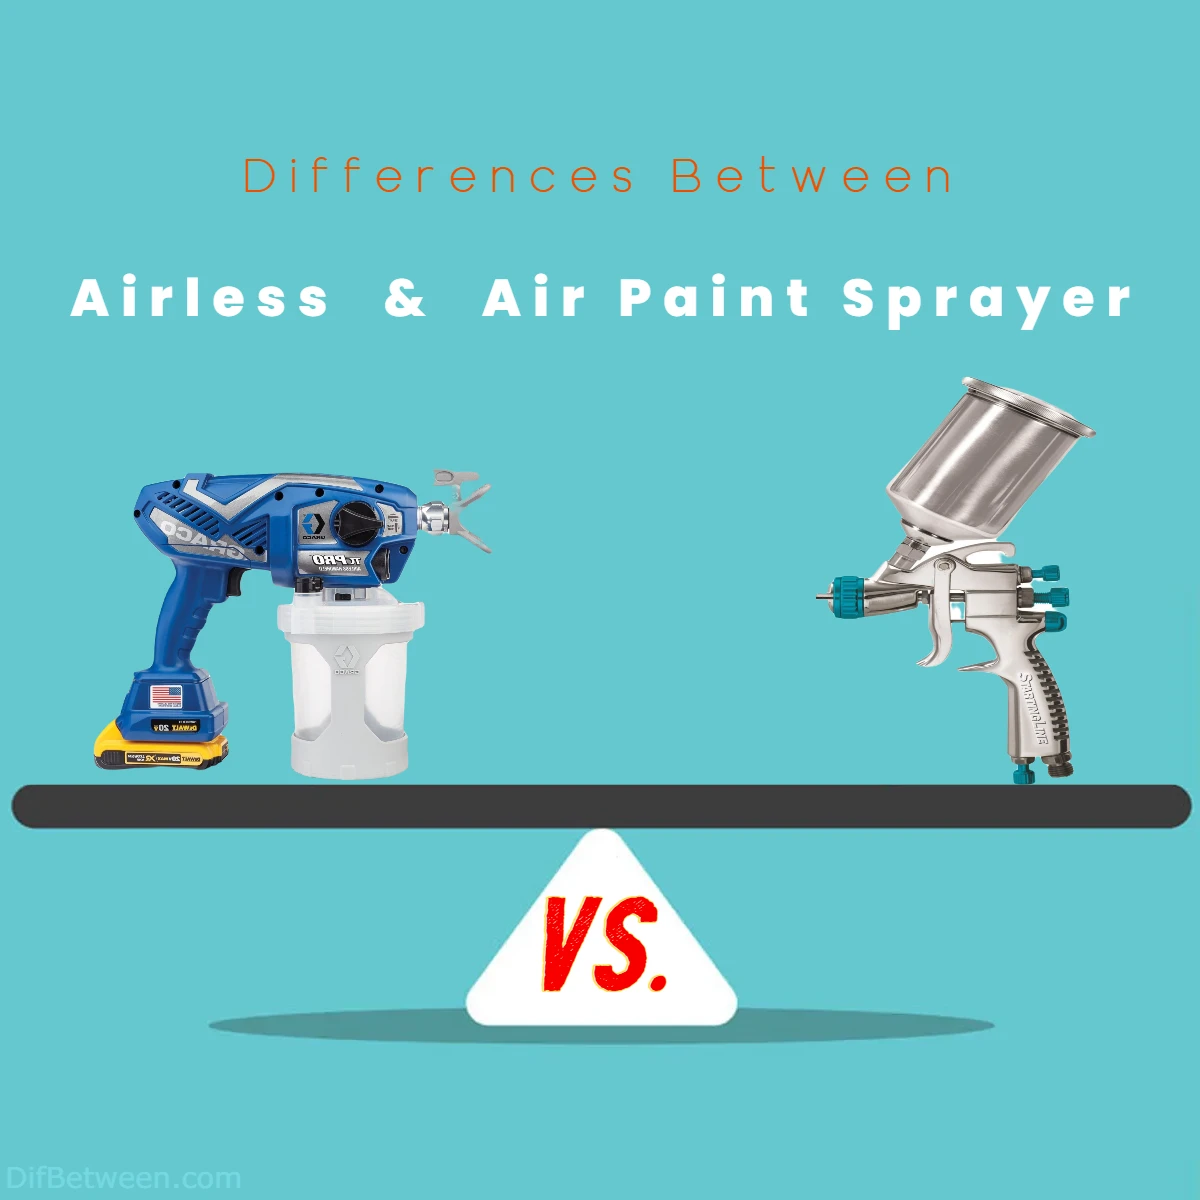 Differences Between Airless vs Air Paint Sprayer